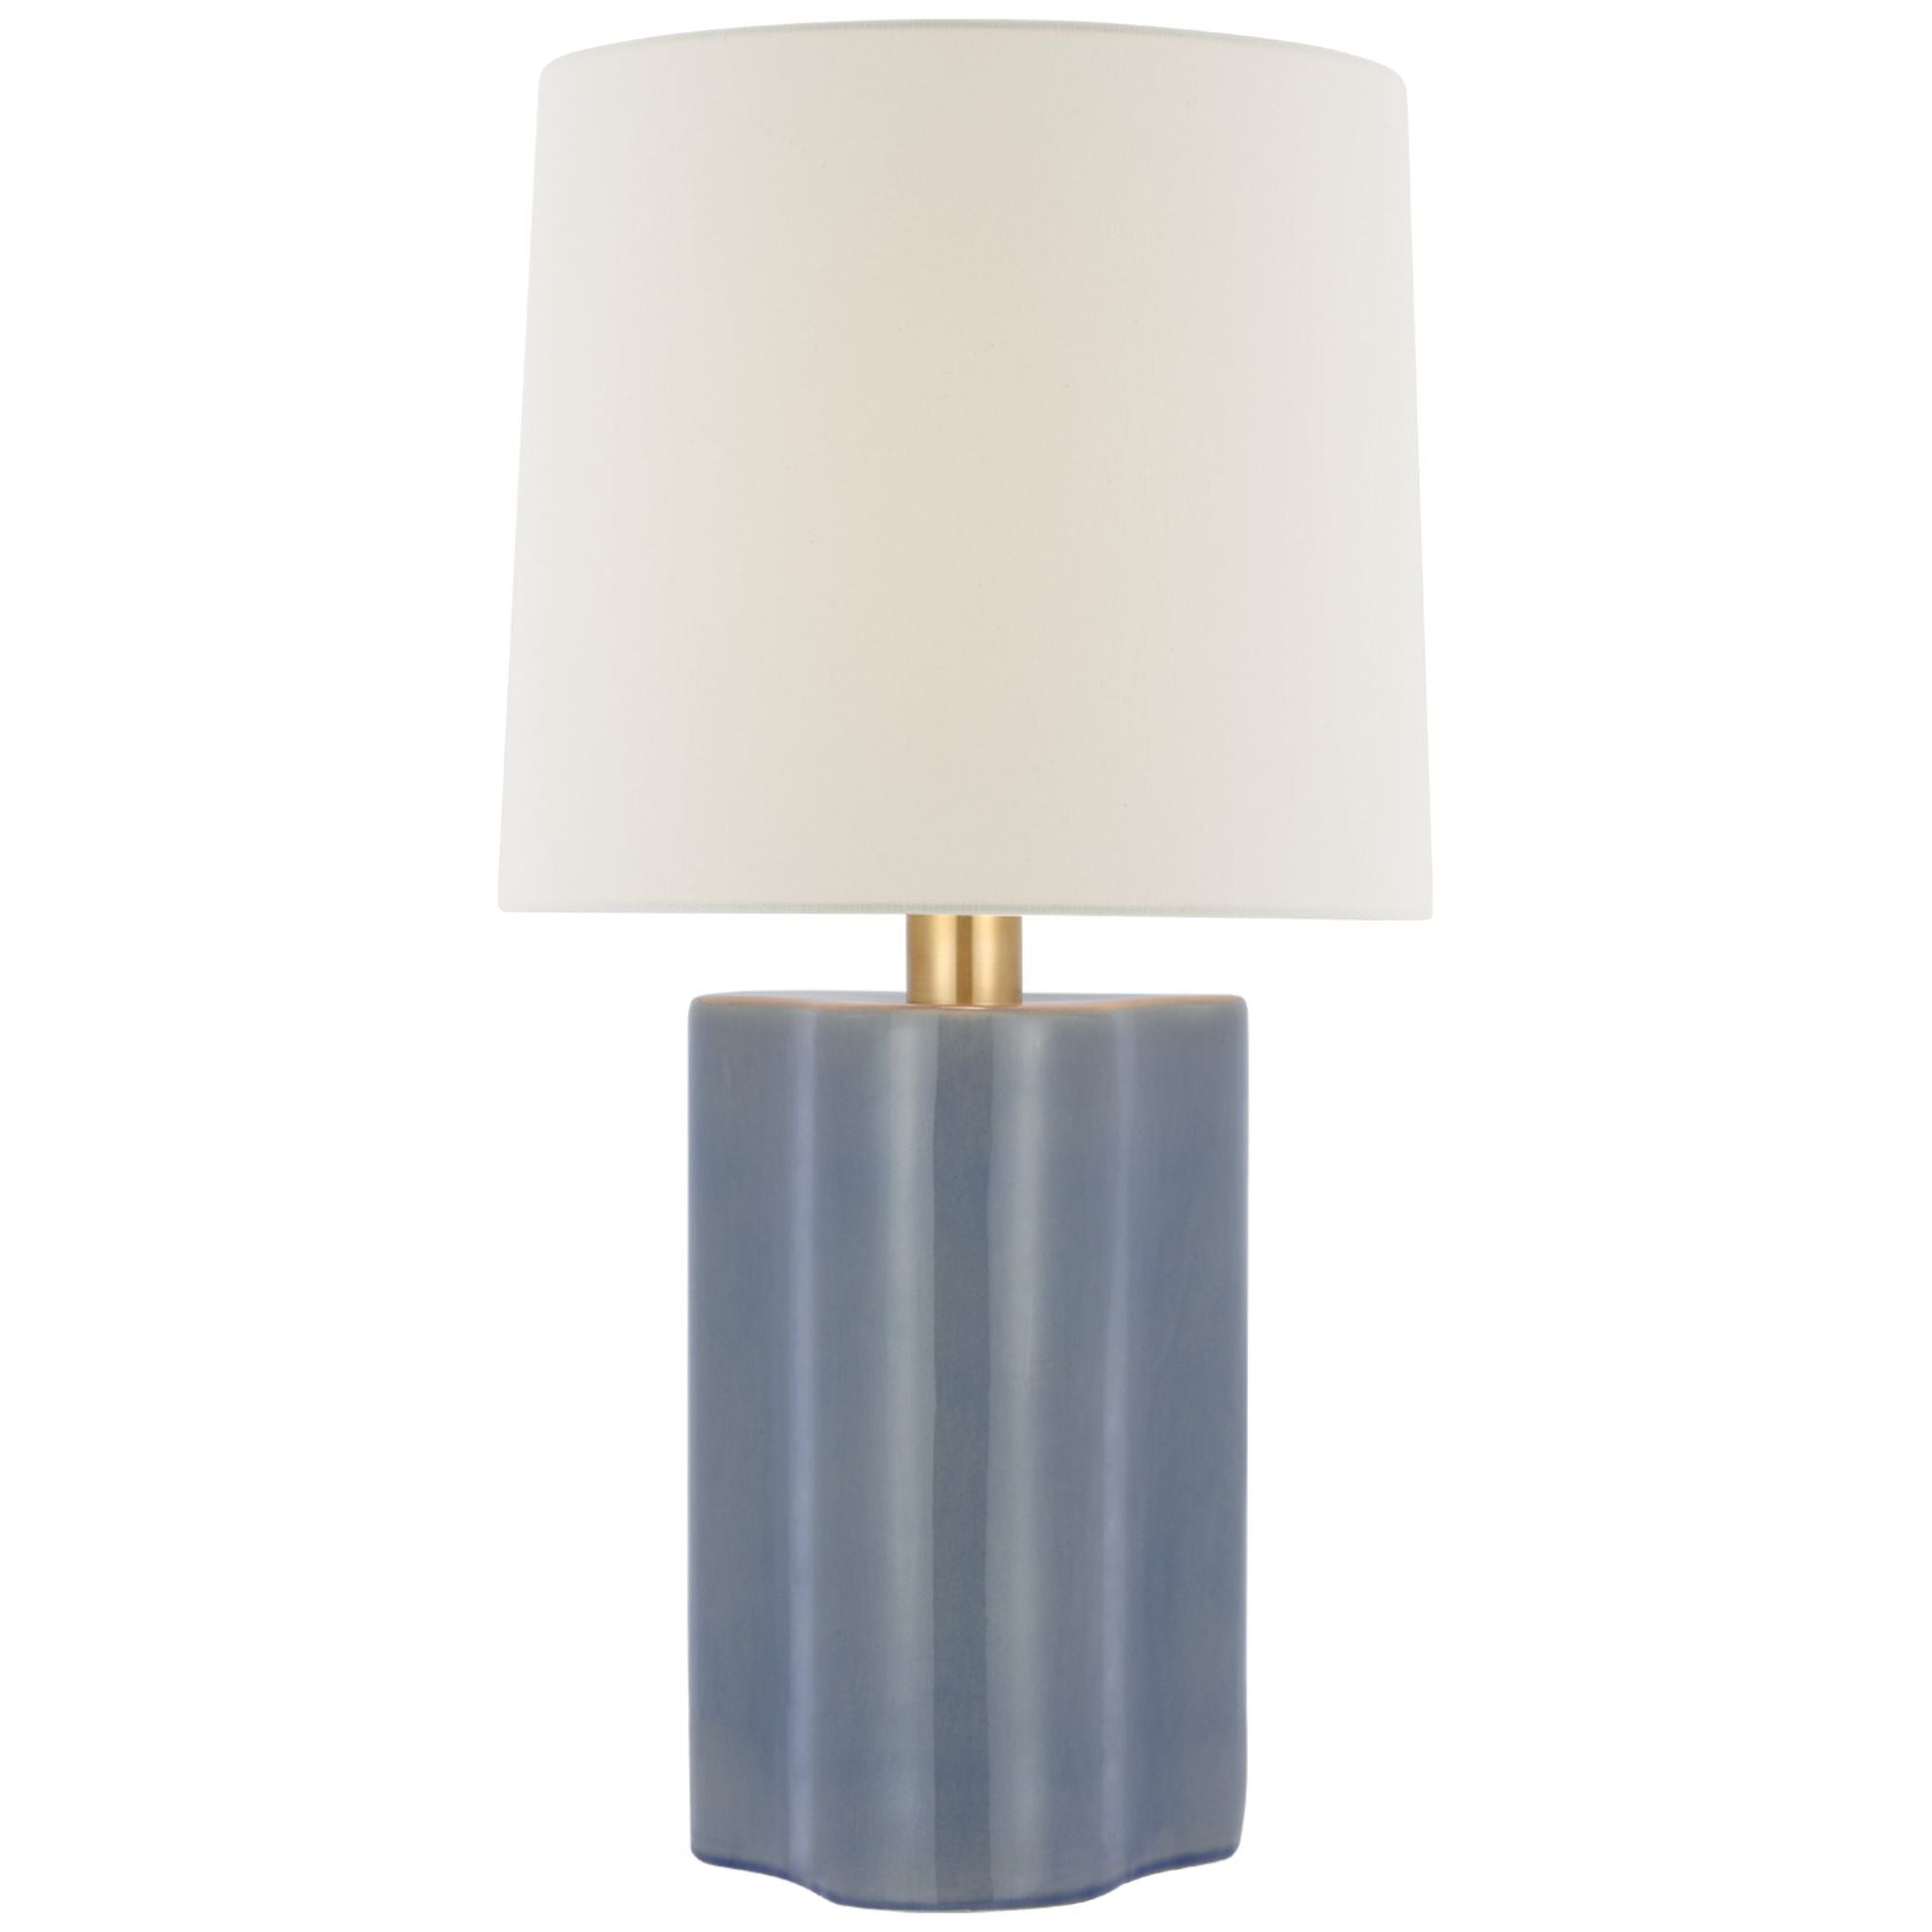 Barbara Barry Lakepoint Large Table Lamp in Polar Blue Crackle with Linen Shade